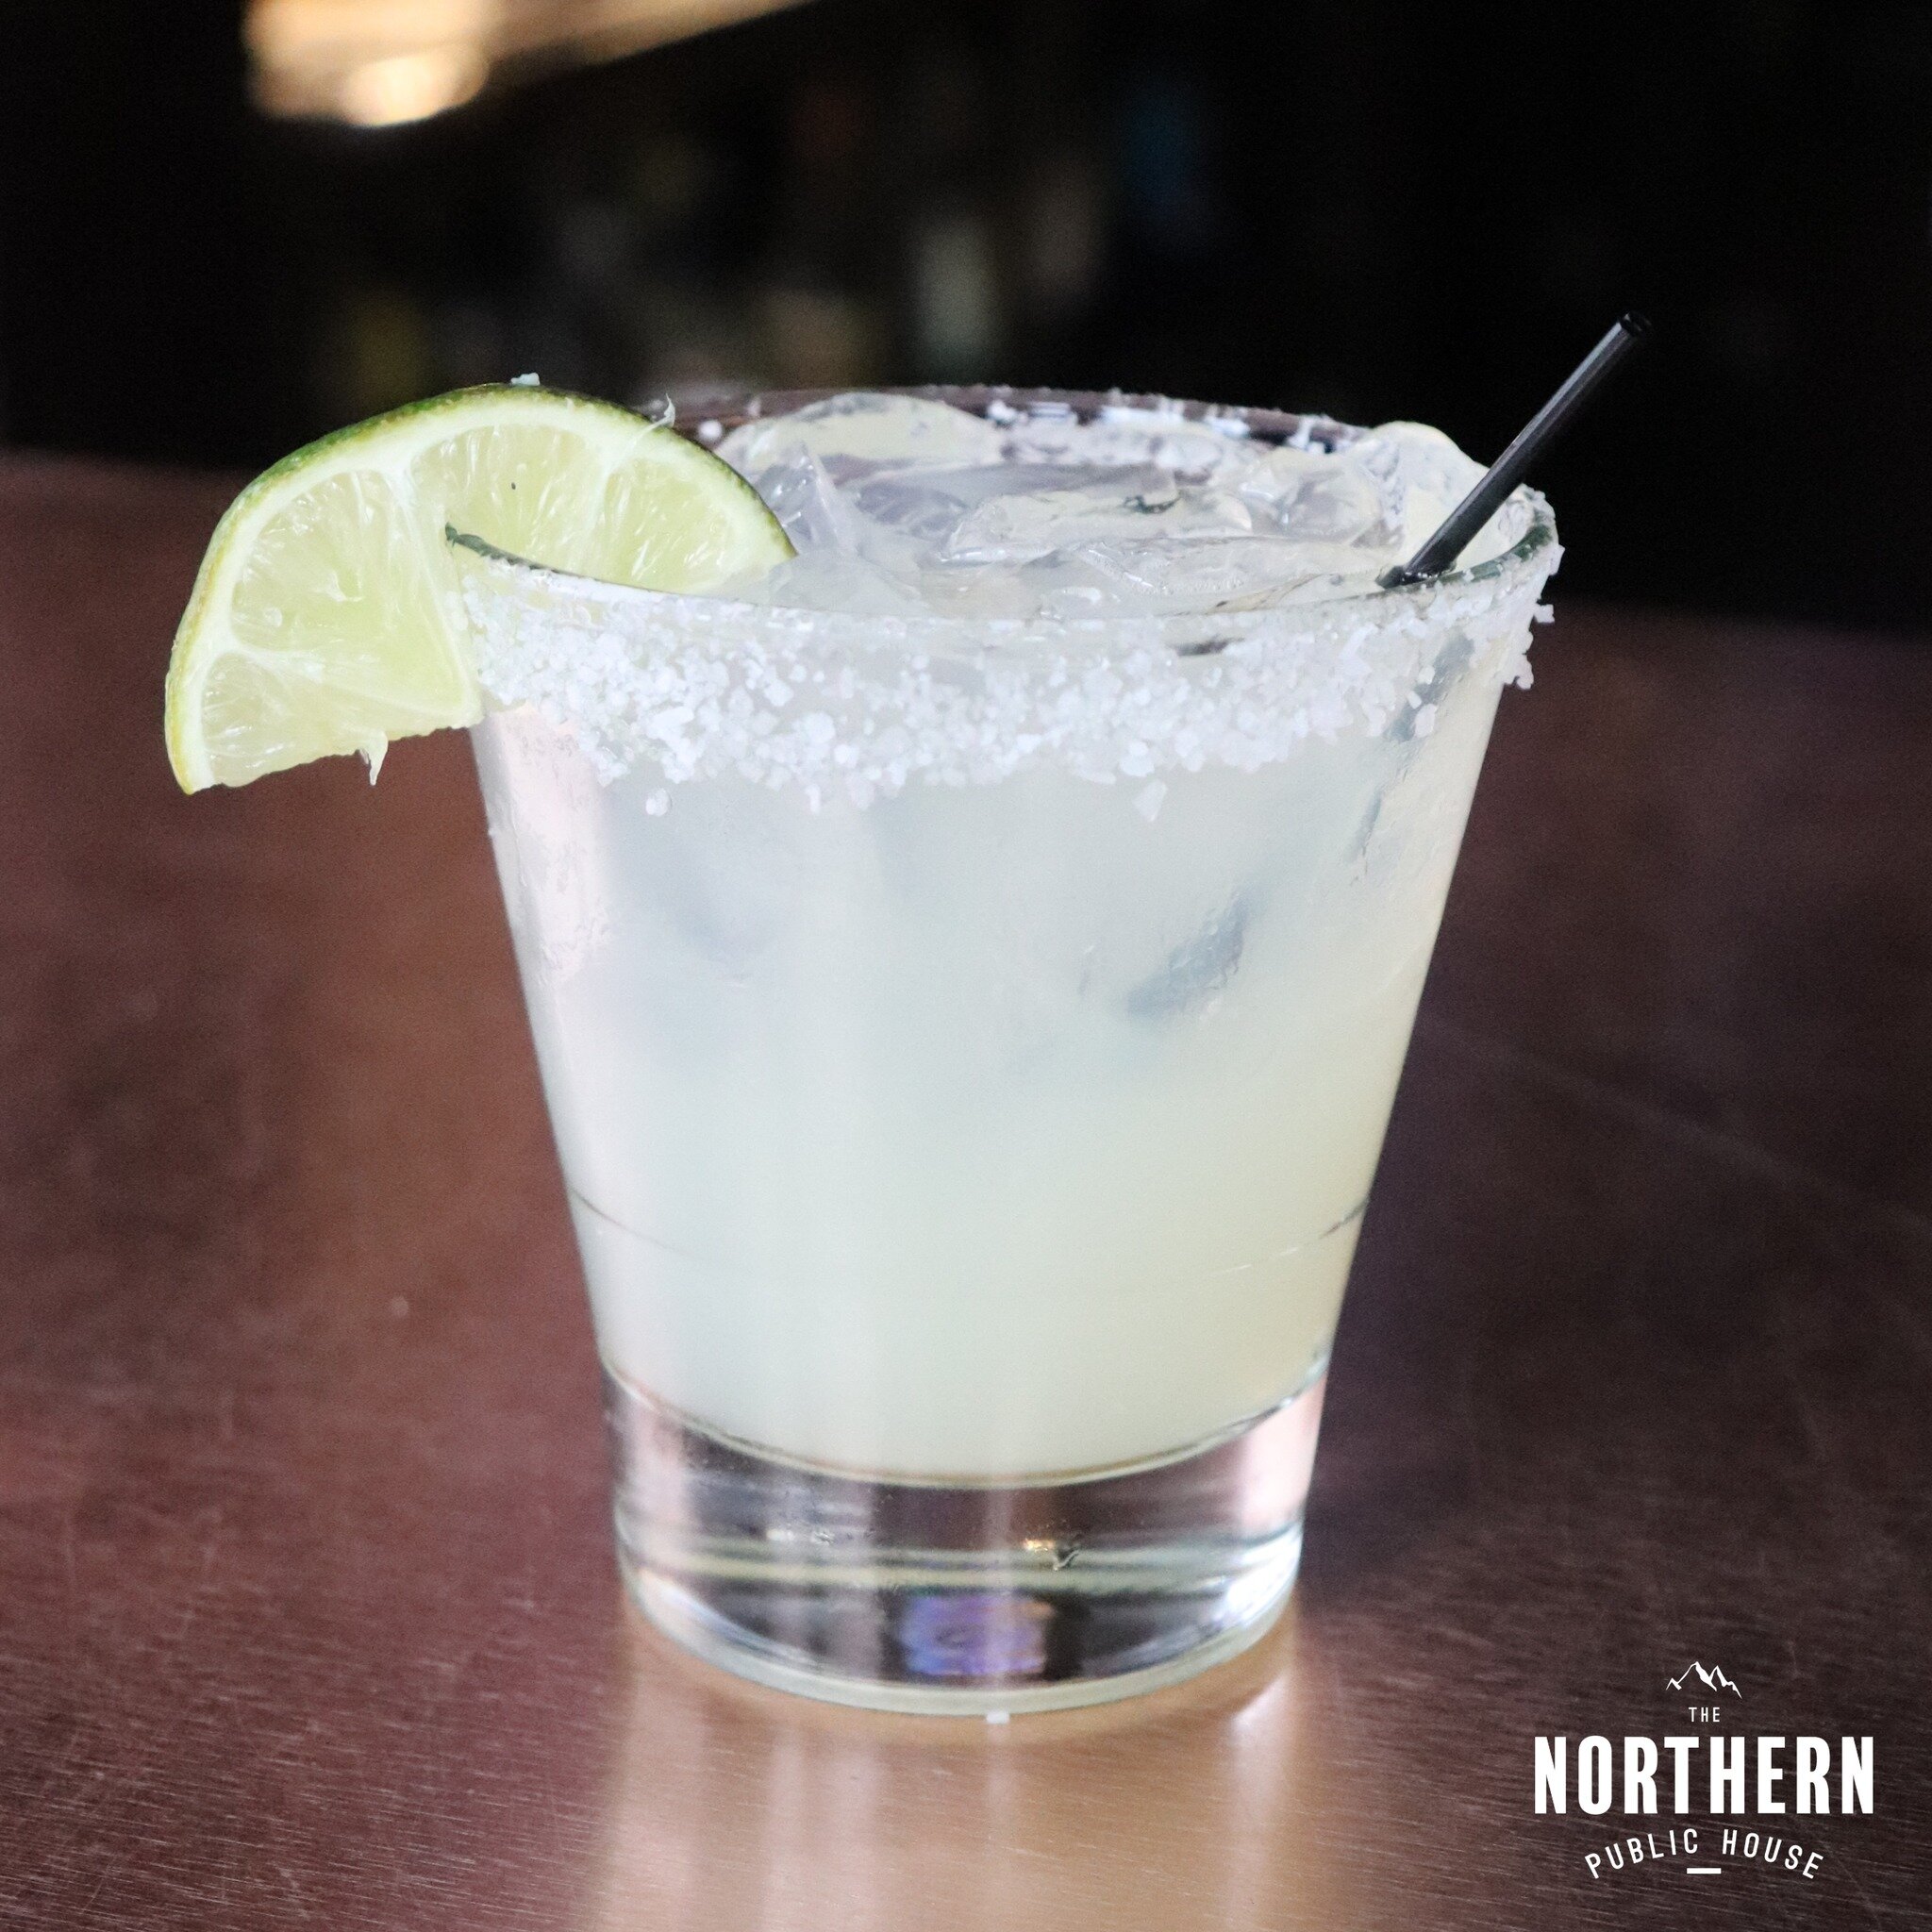 Spring has finally arrived, and what better way to celebrate those sunny days than with a refreshing Scratch Margarita at The Northern? Come in and join us for a taste of the season!